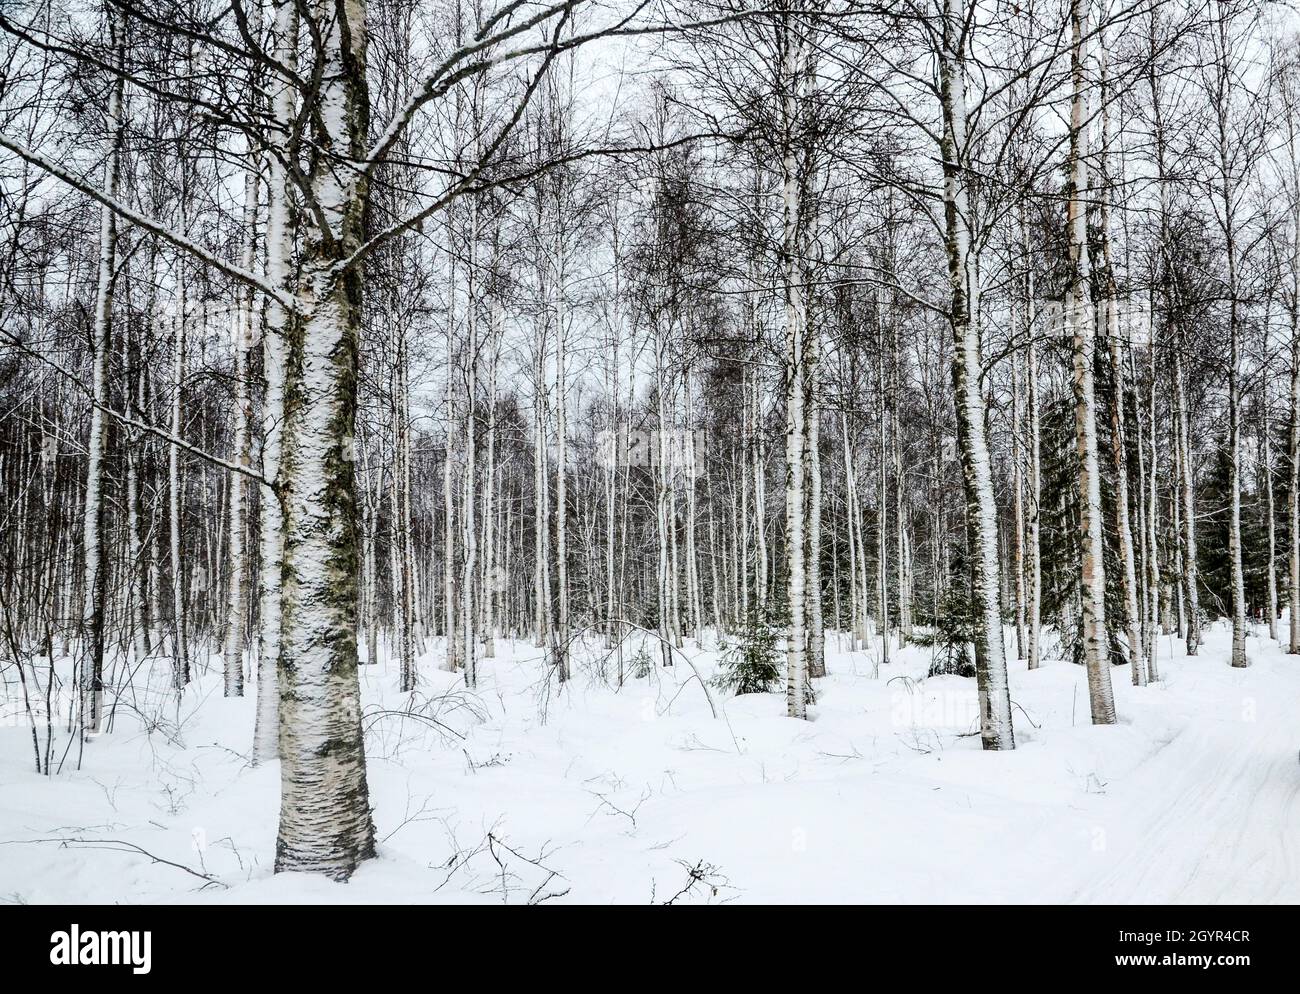 Lapland, Scandinavia, snow covered trees in a forest Stock Photo